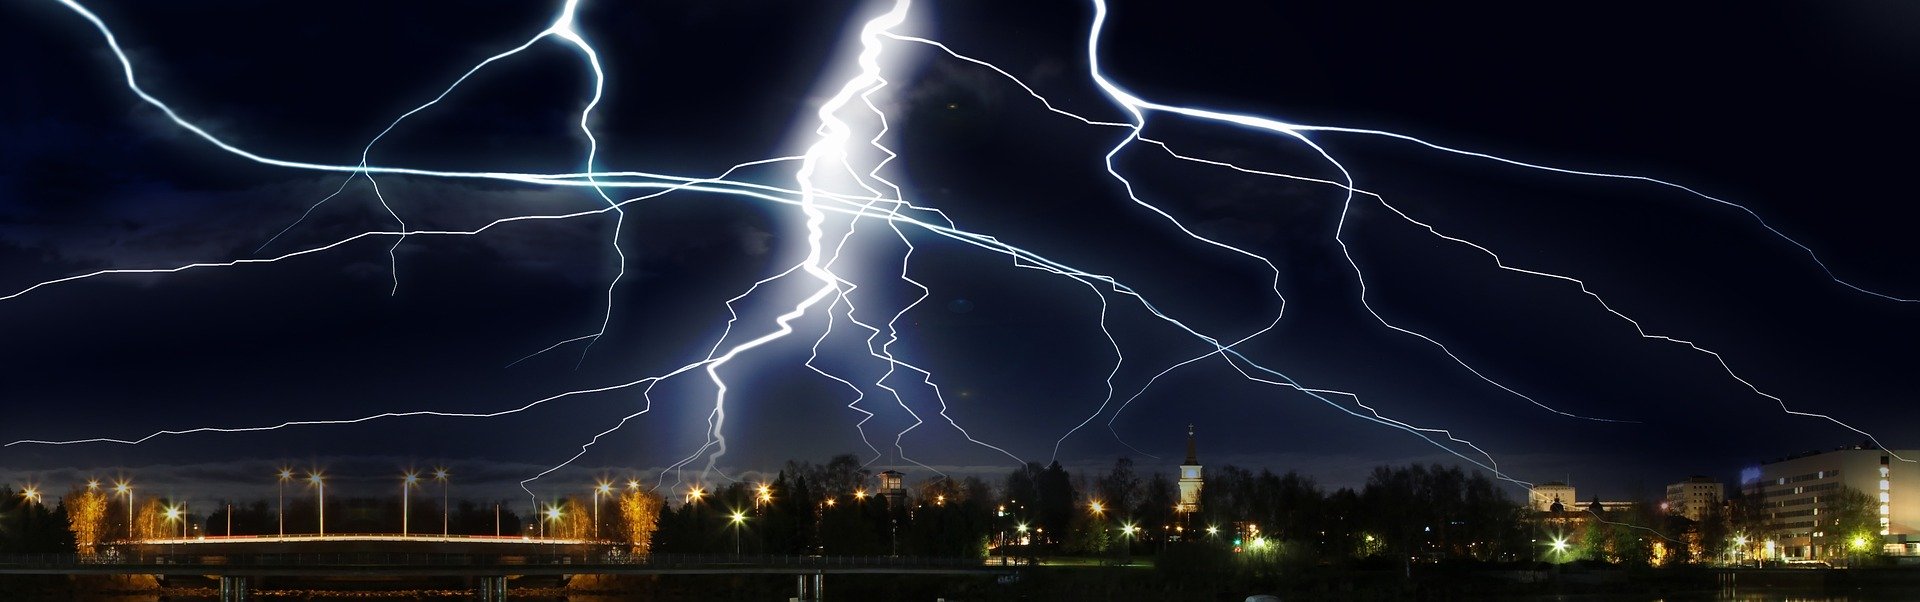 Lightning Strikes Can Be Very Damaging, Especially to Electronics and Electrical  Systems. Using High Quality, High Performance Surge Protectors Can Reduce The Risk of Damage. Get the Right Gear!